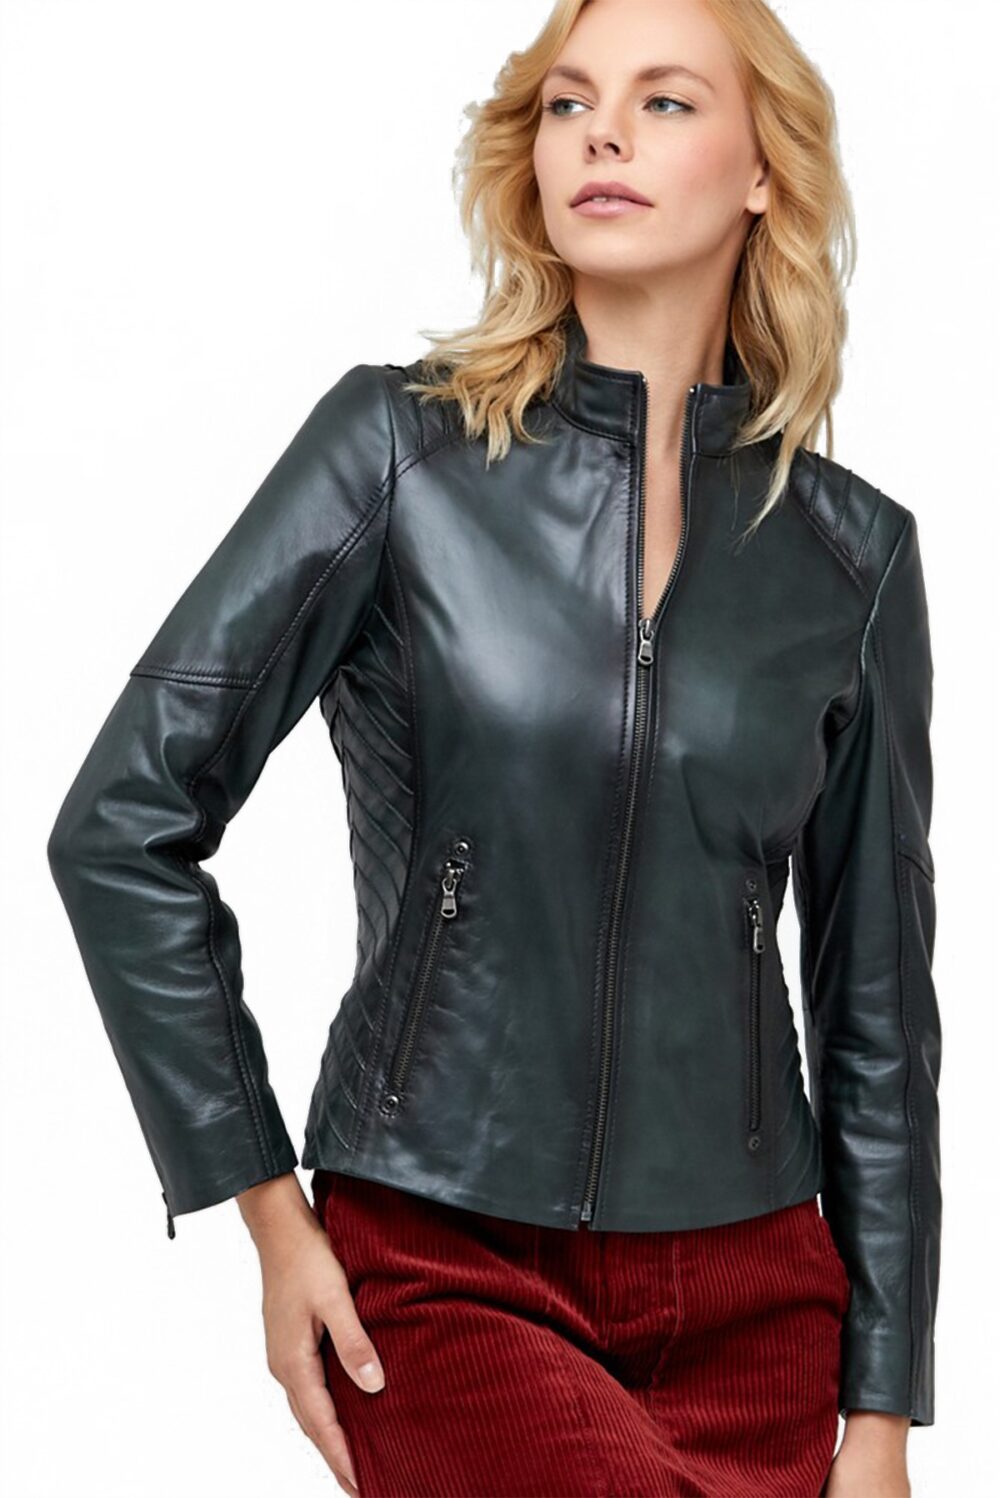 Ladies Black Trench Jacket in Real Leather | Faux Fur Jacket